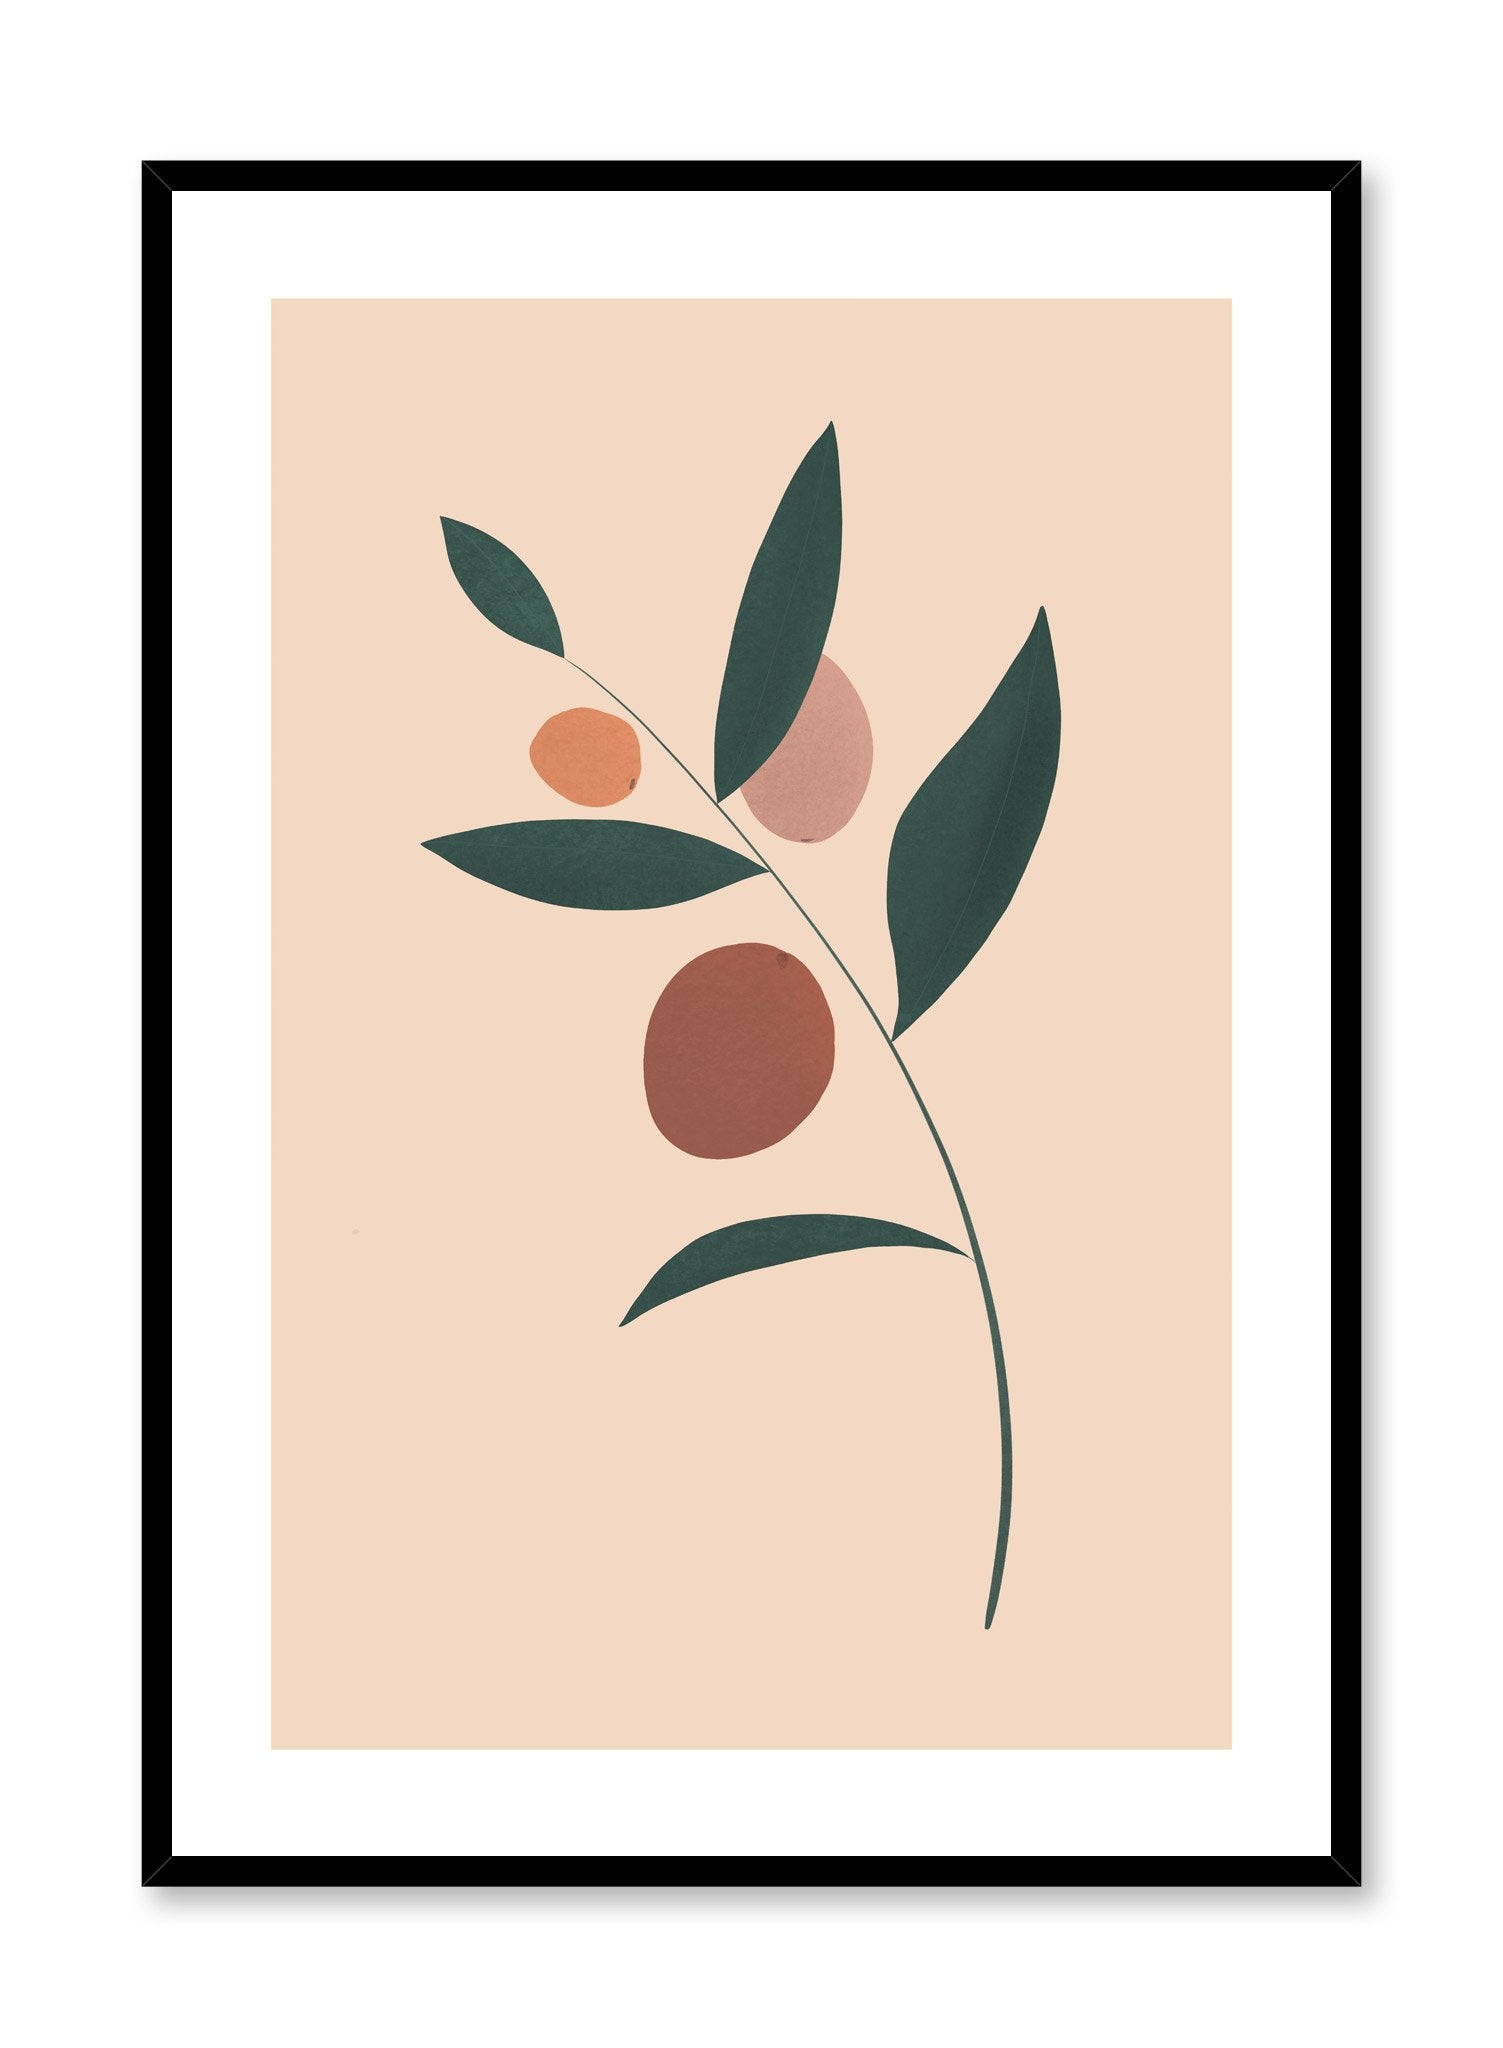 Modern minimalist poster by Opposite Wall with single leaf on beige background